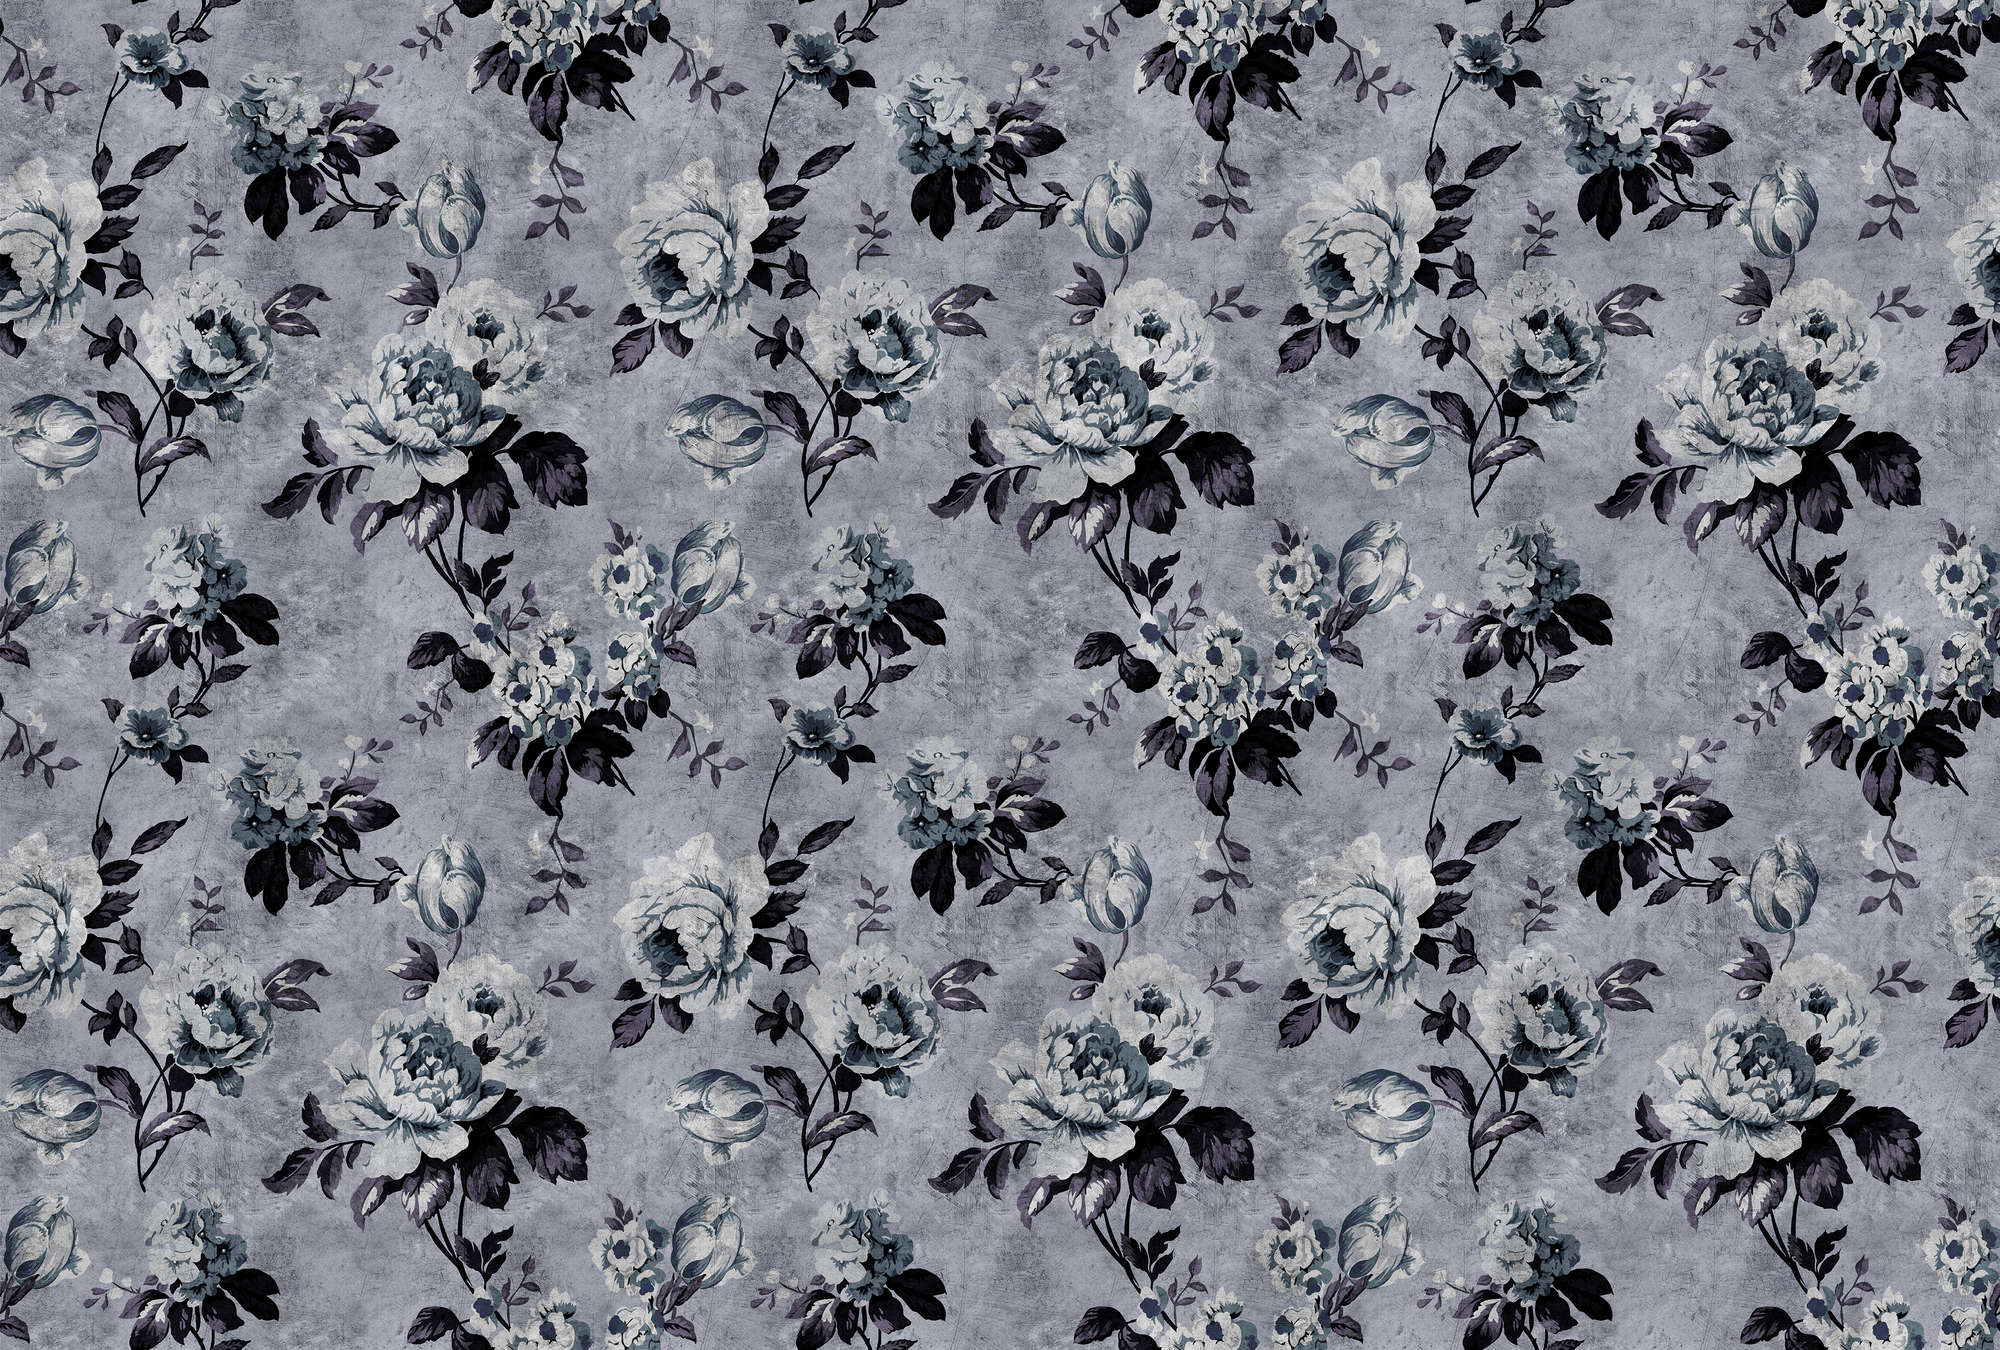             Wild roses 6 - Rose wallpaper in retro look, grey in scratchy structure - Blue, Violet | Pearl smooth non-woven
        